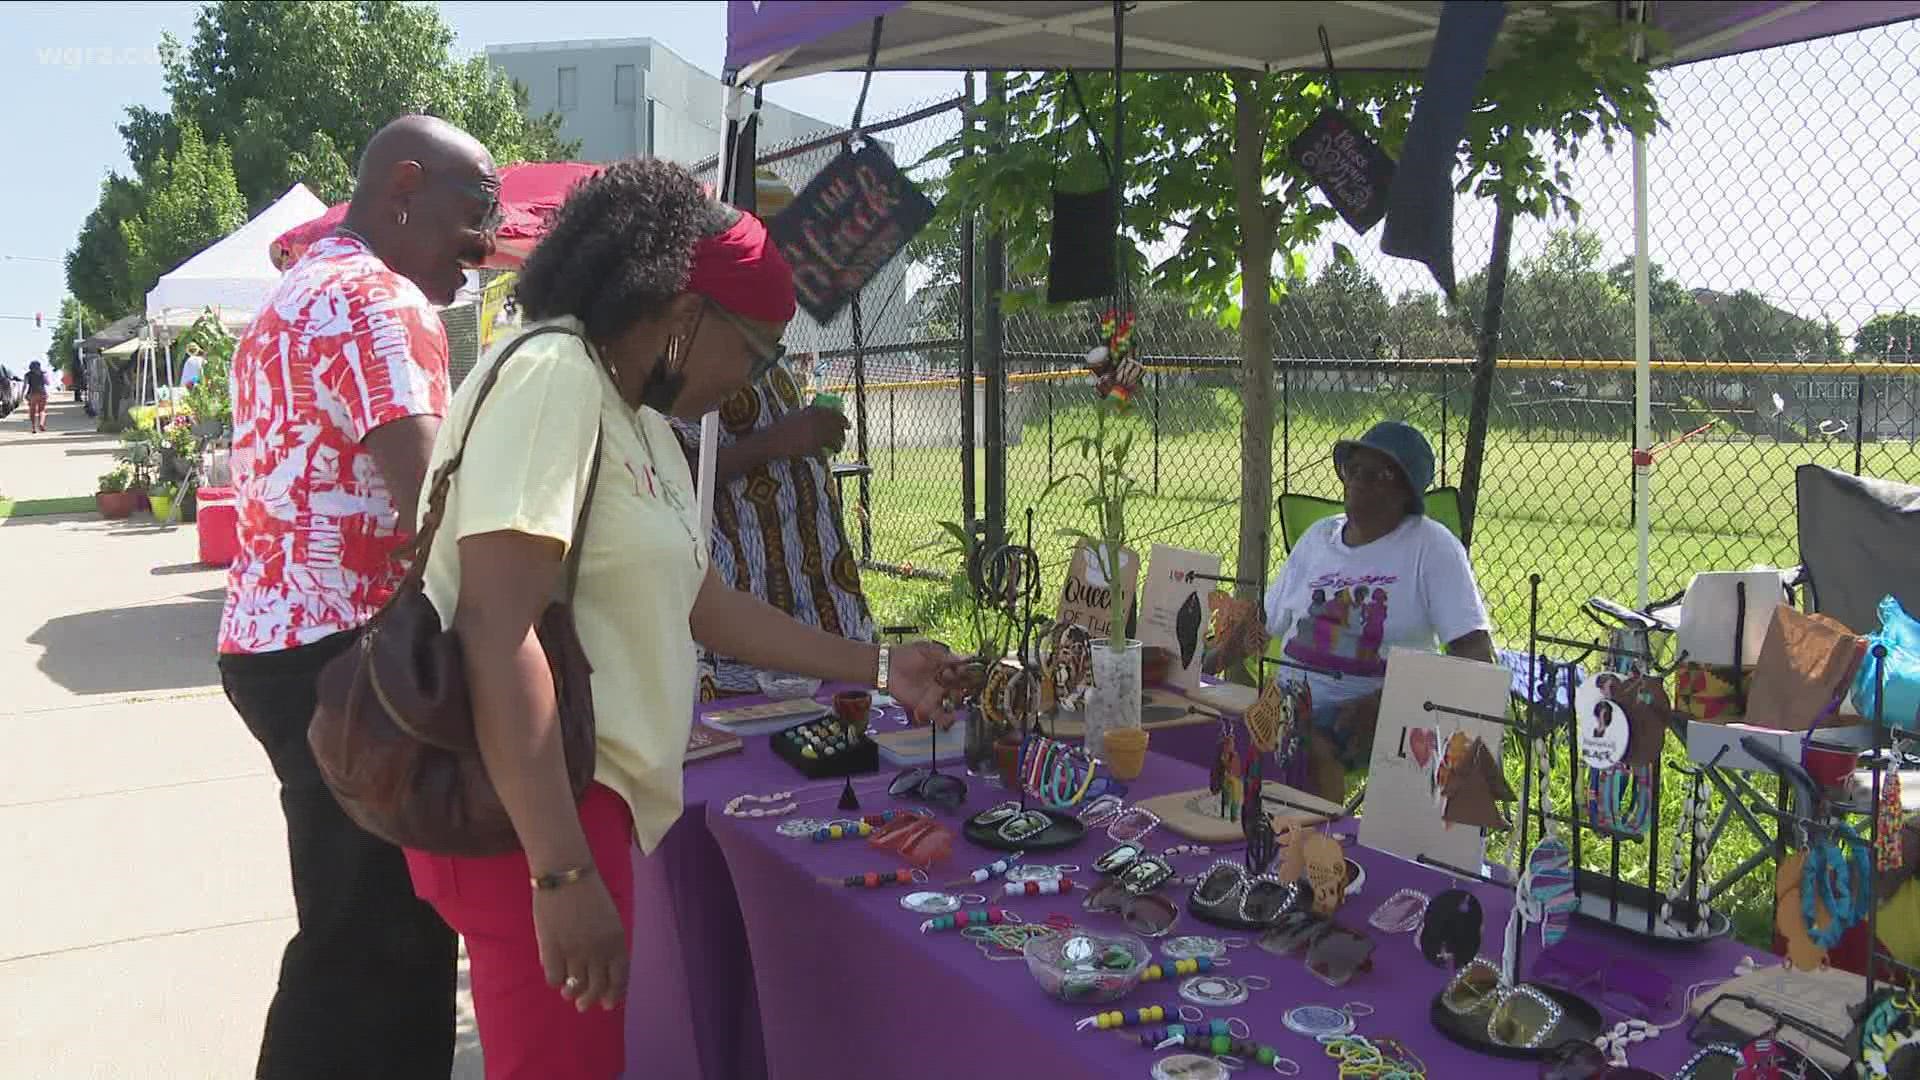 The vendor and farmer's market also offers music and entertainment, exercise and mental health counseling.